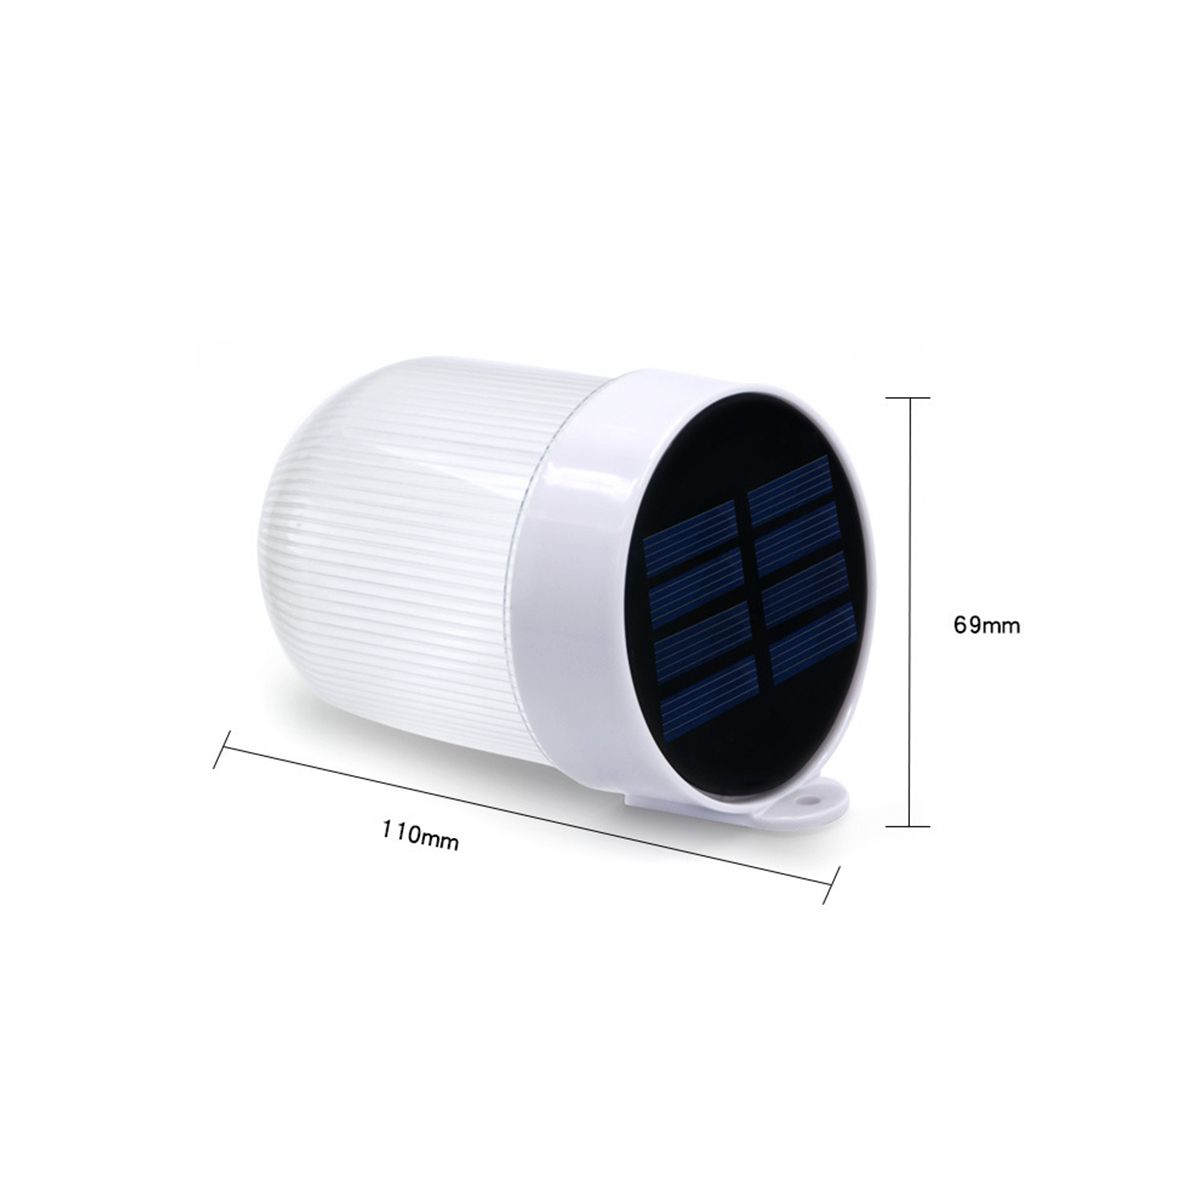 Outdoor-Solar-Powered-LED-Fence-Light-Dual-Color-Temperature-Waterproof-Wall-Lamp-Garden-Patio-Light-1721231